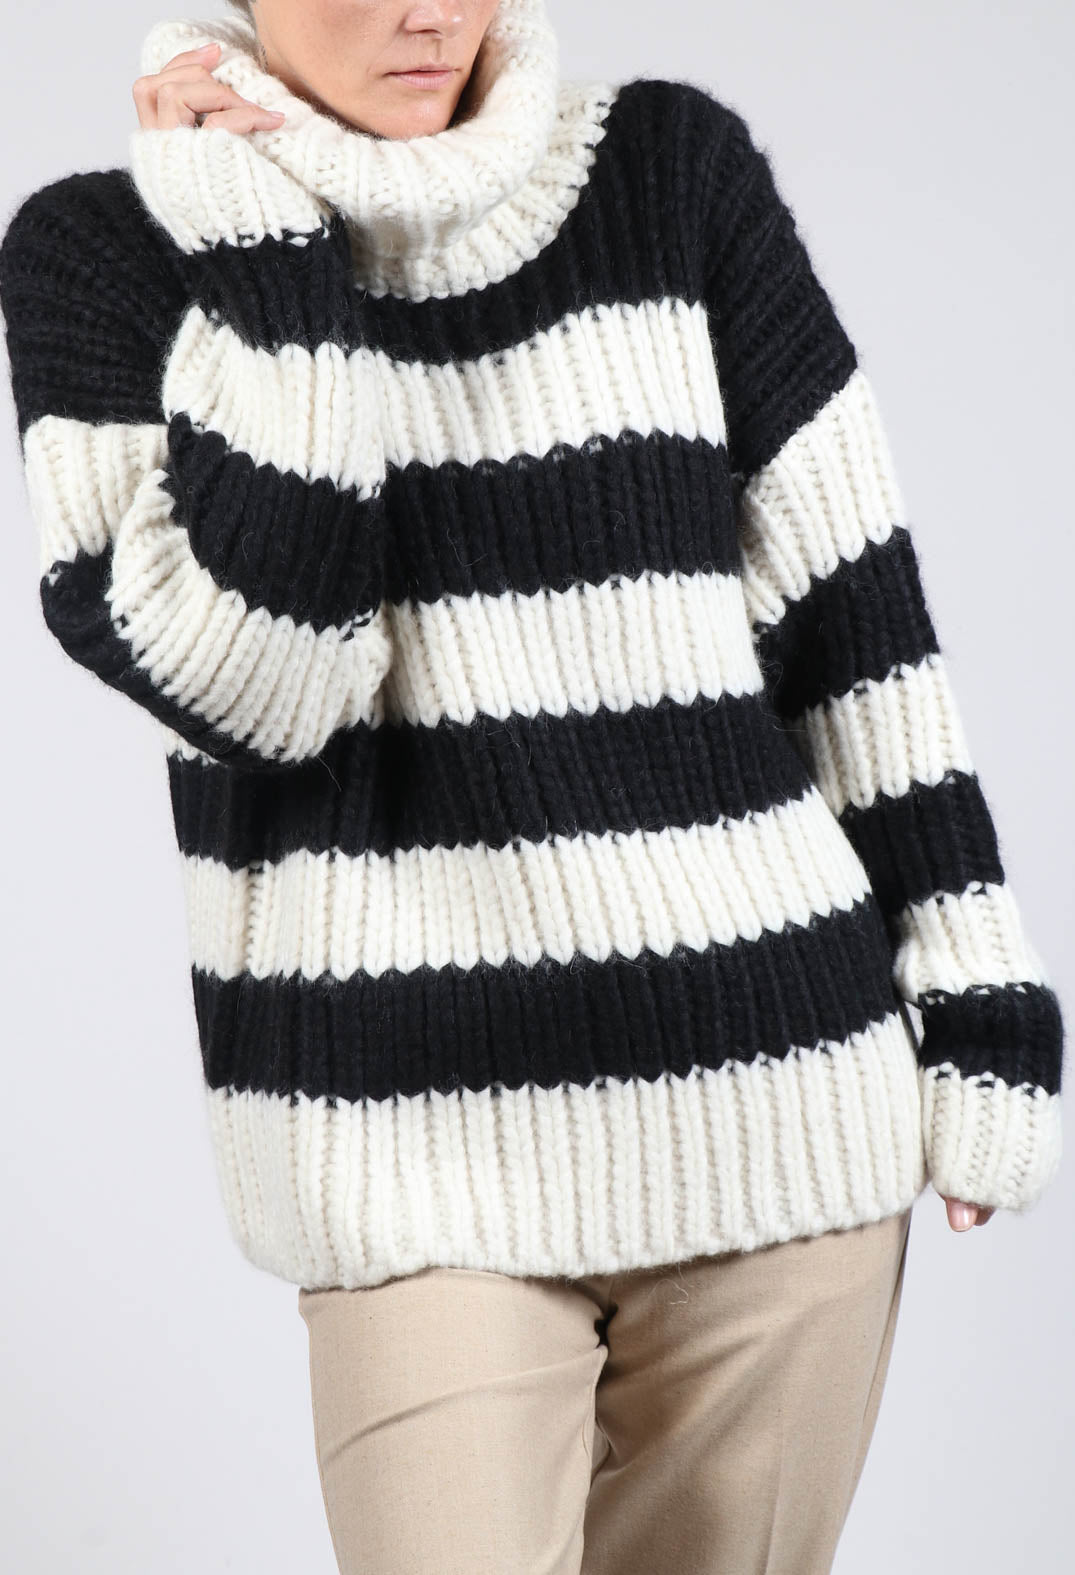 Ava Sweater in Black and White